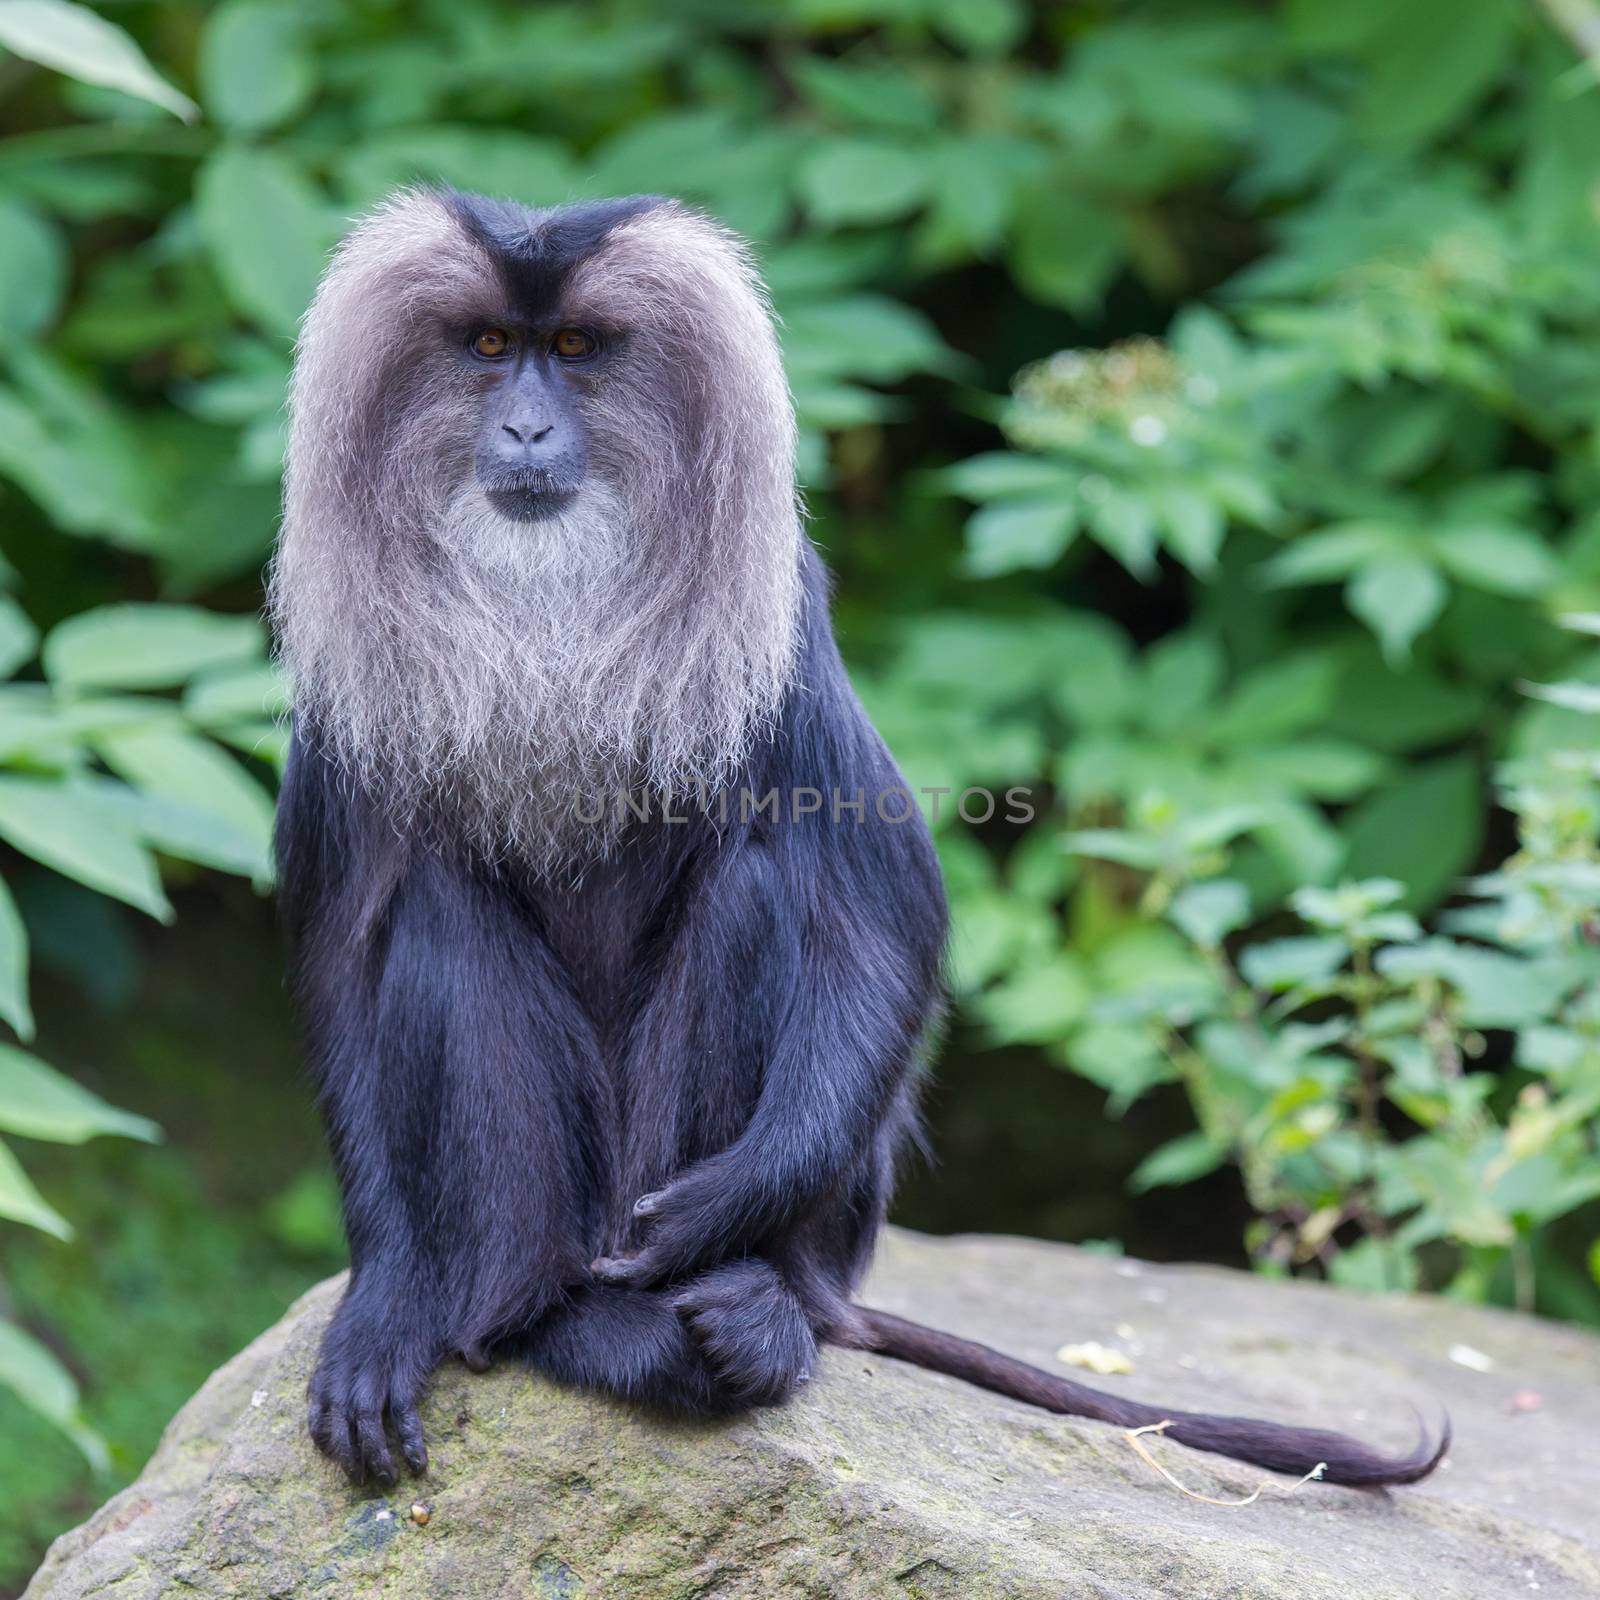 Lion-tailed Macaque (Macaca silenus) by michaklootwijk